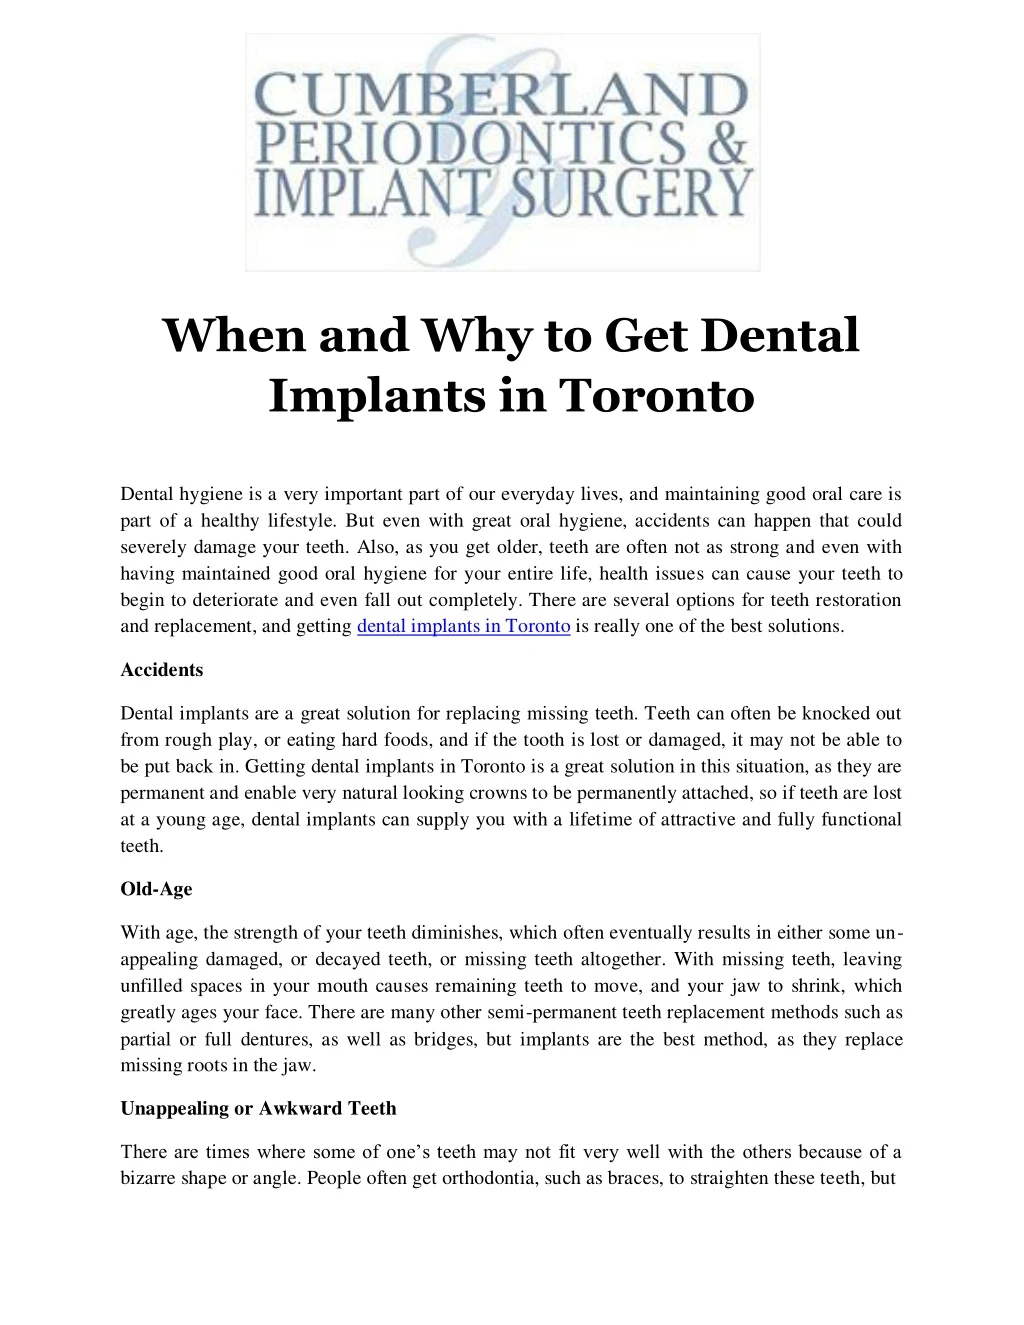 when and why to get dental implants in toronto